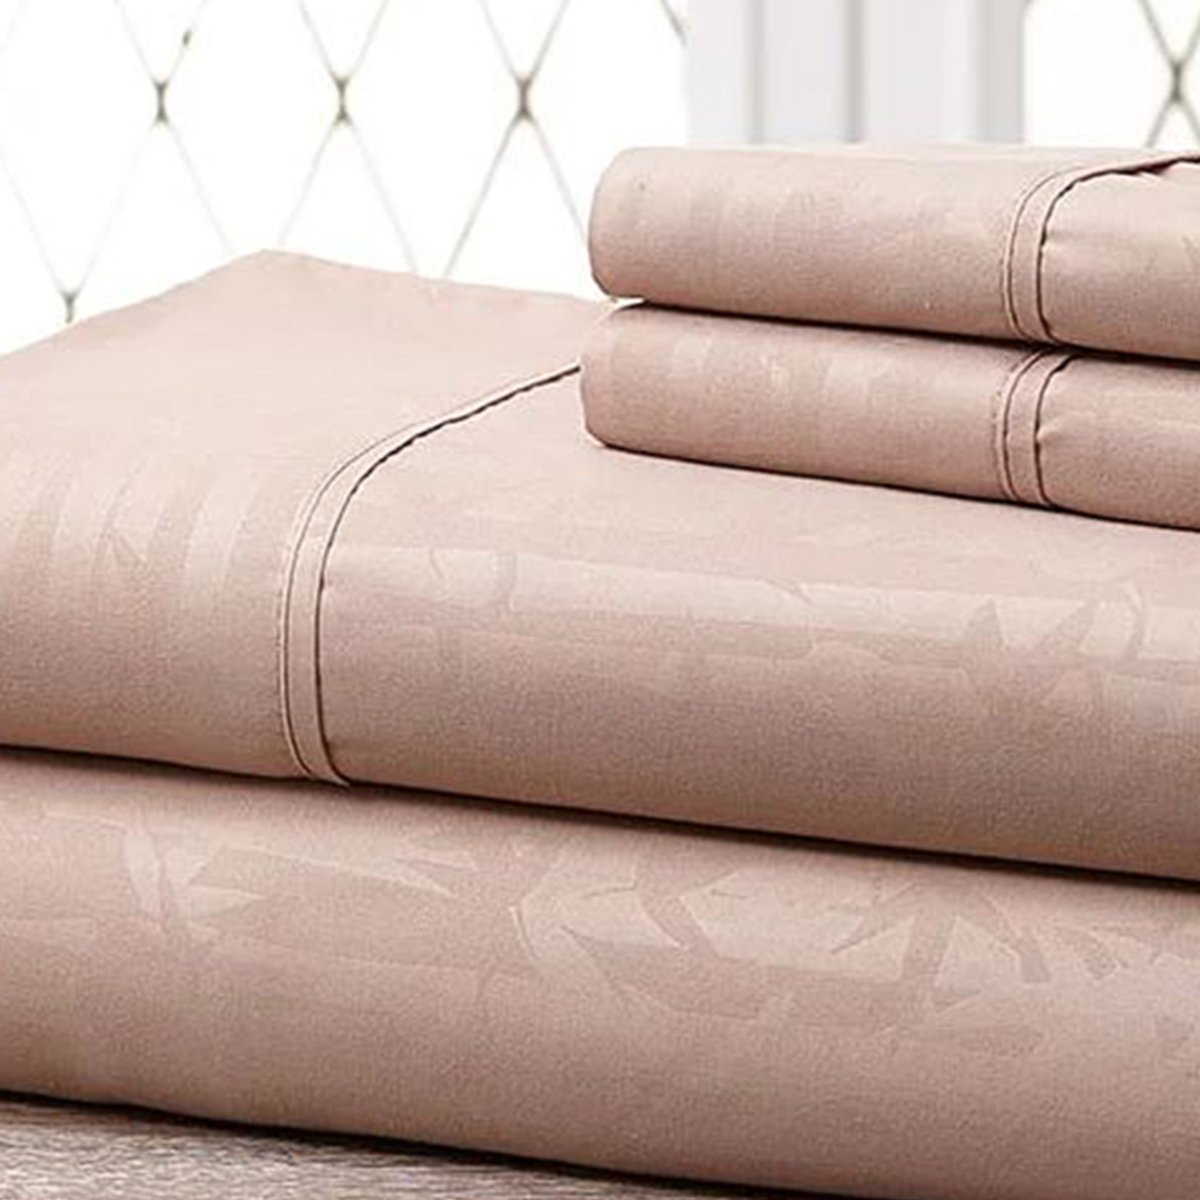 Hny-4pc-eb-tau-f Super-soft 1600 Series Bamboo Embossed Bed Sheet, Taupe - Full, 4 Piece